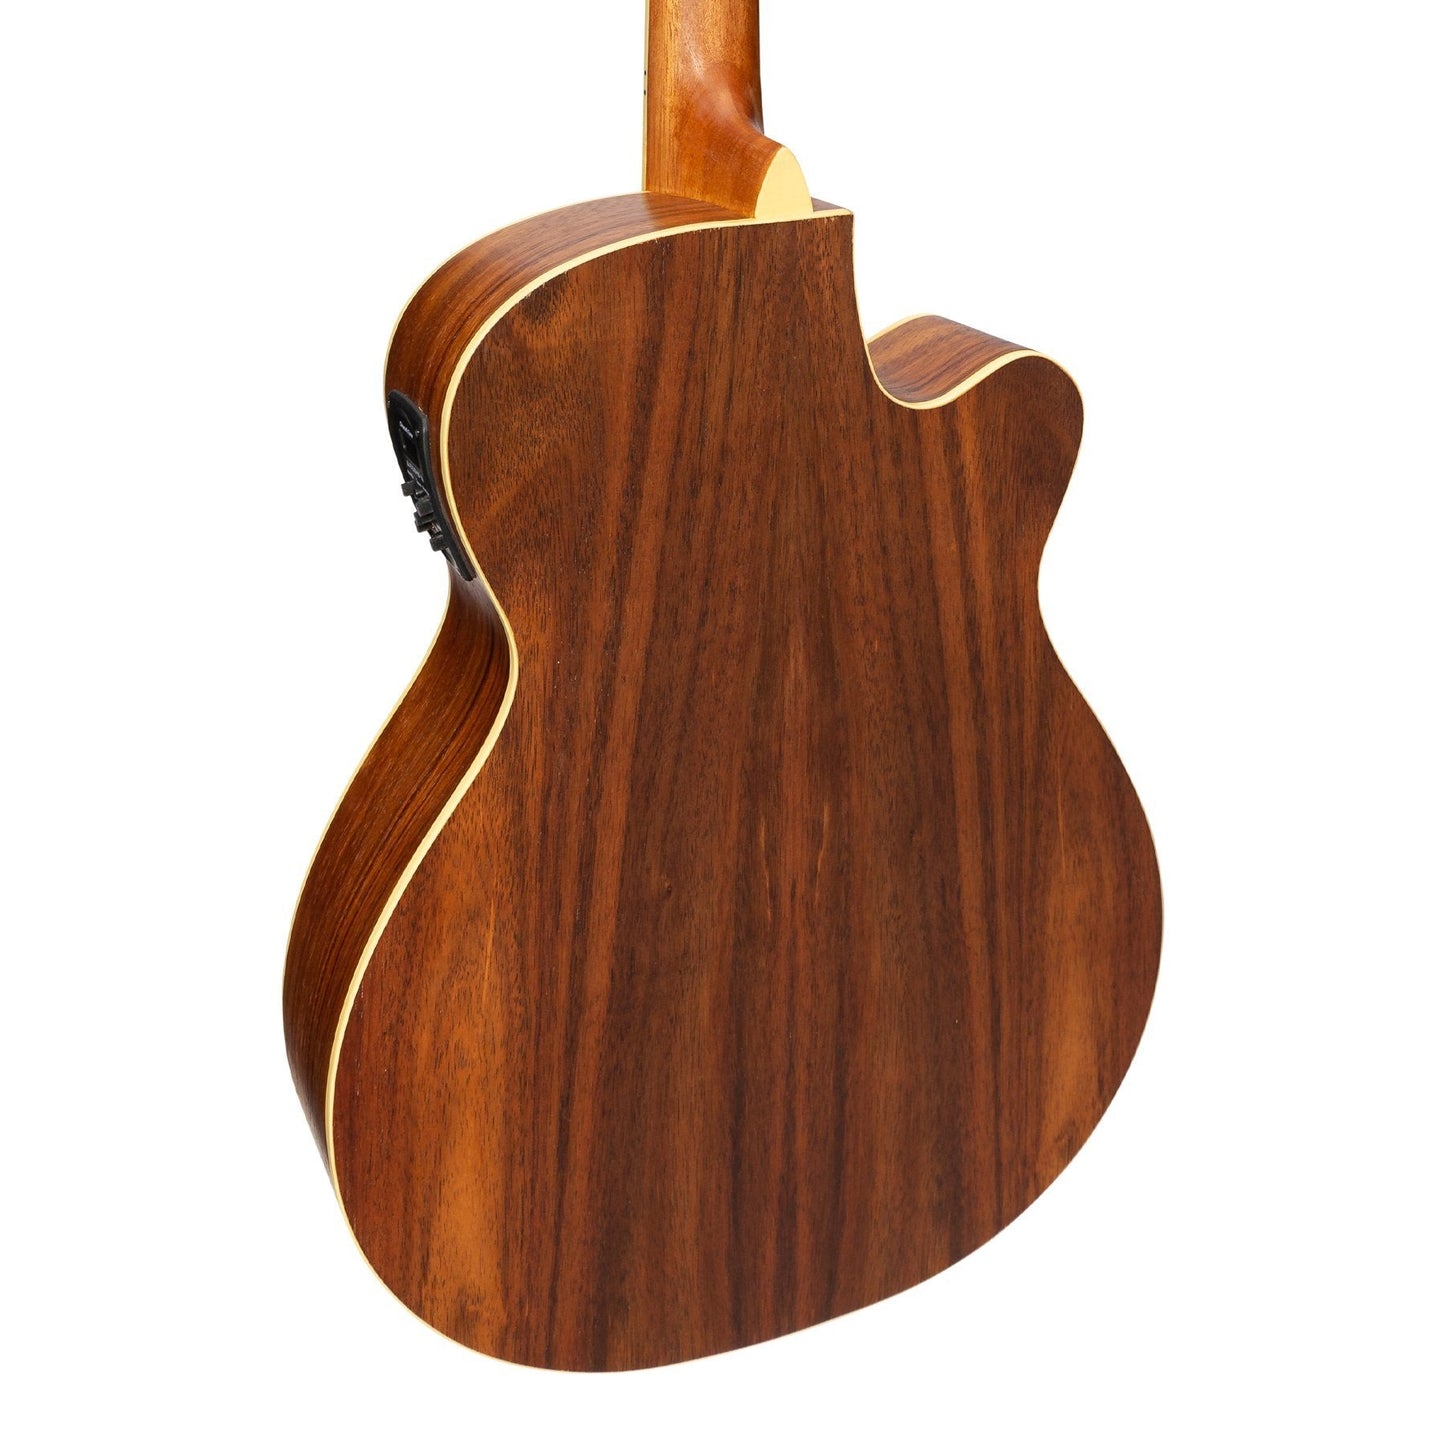 Martinez '41 Series' Left Handed Folk Size Cutaway Acoustic-Electric Guitar (Spruce/Rosewood)